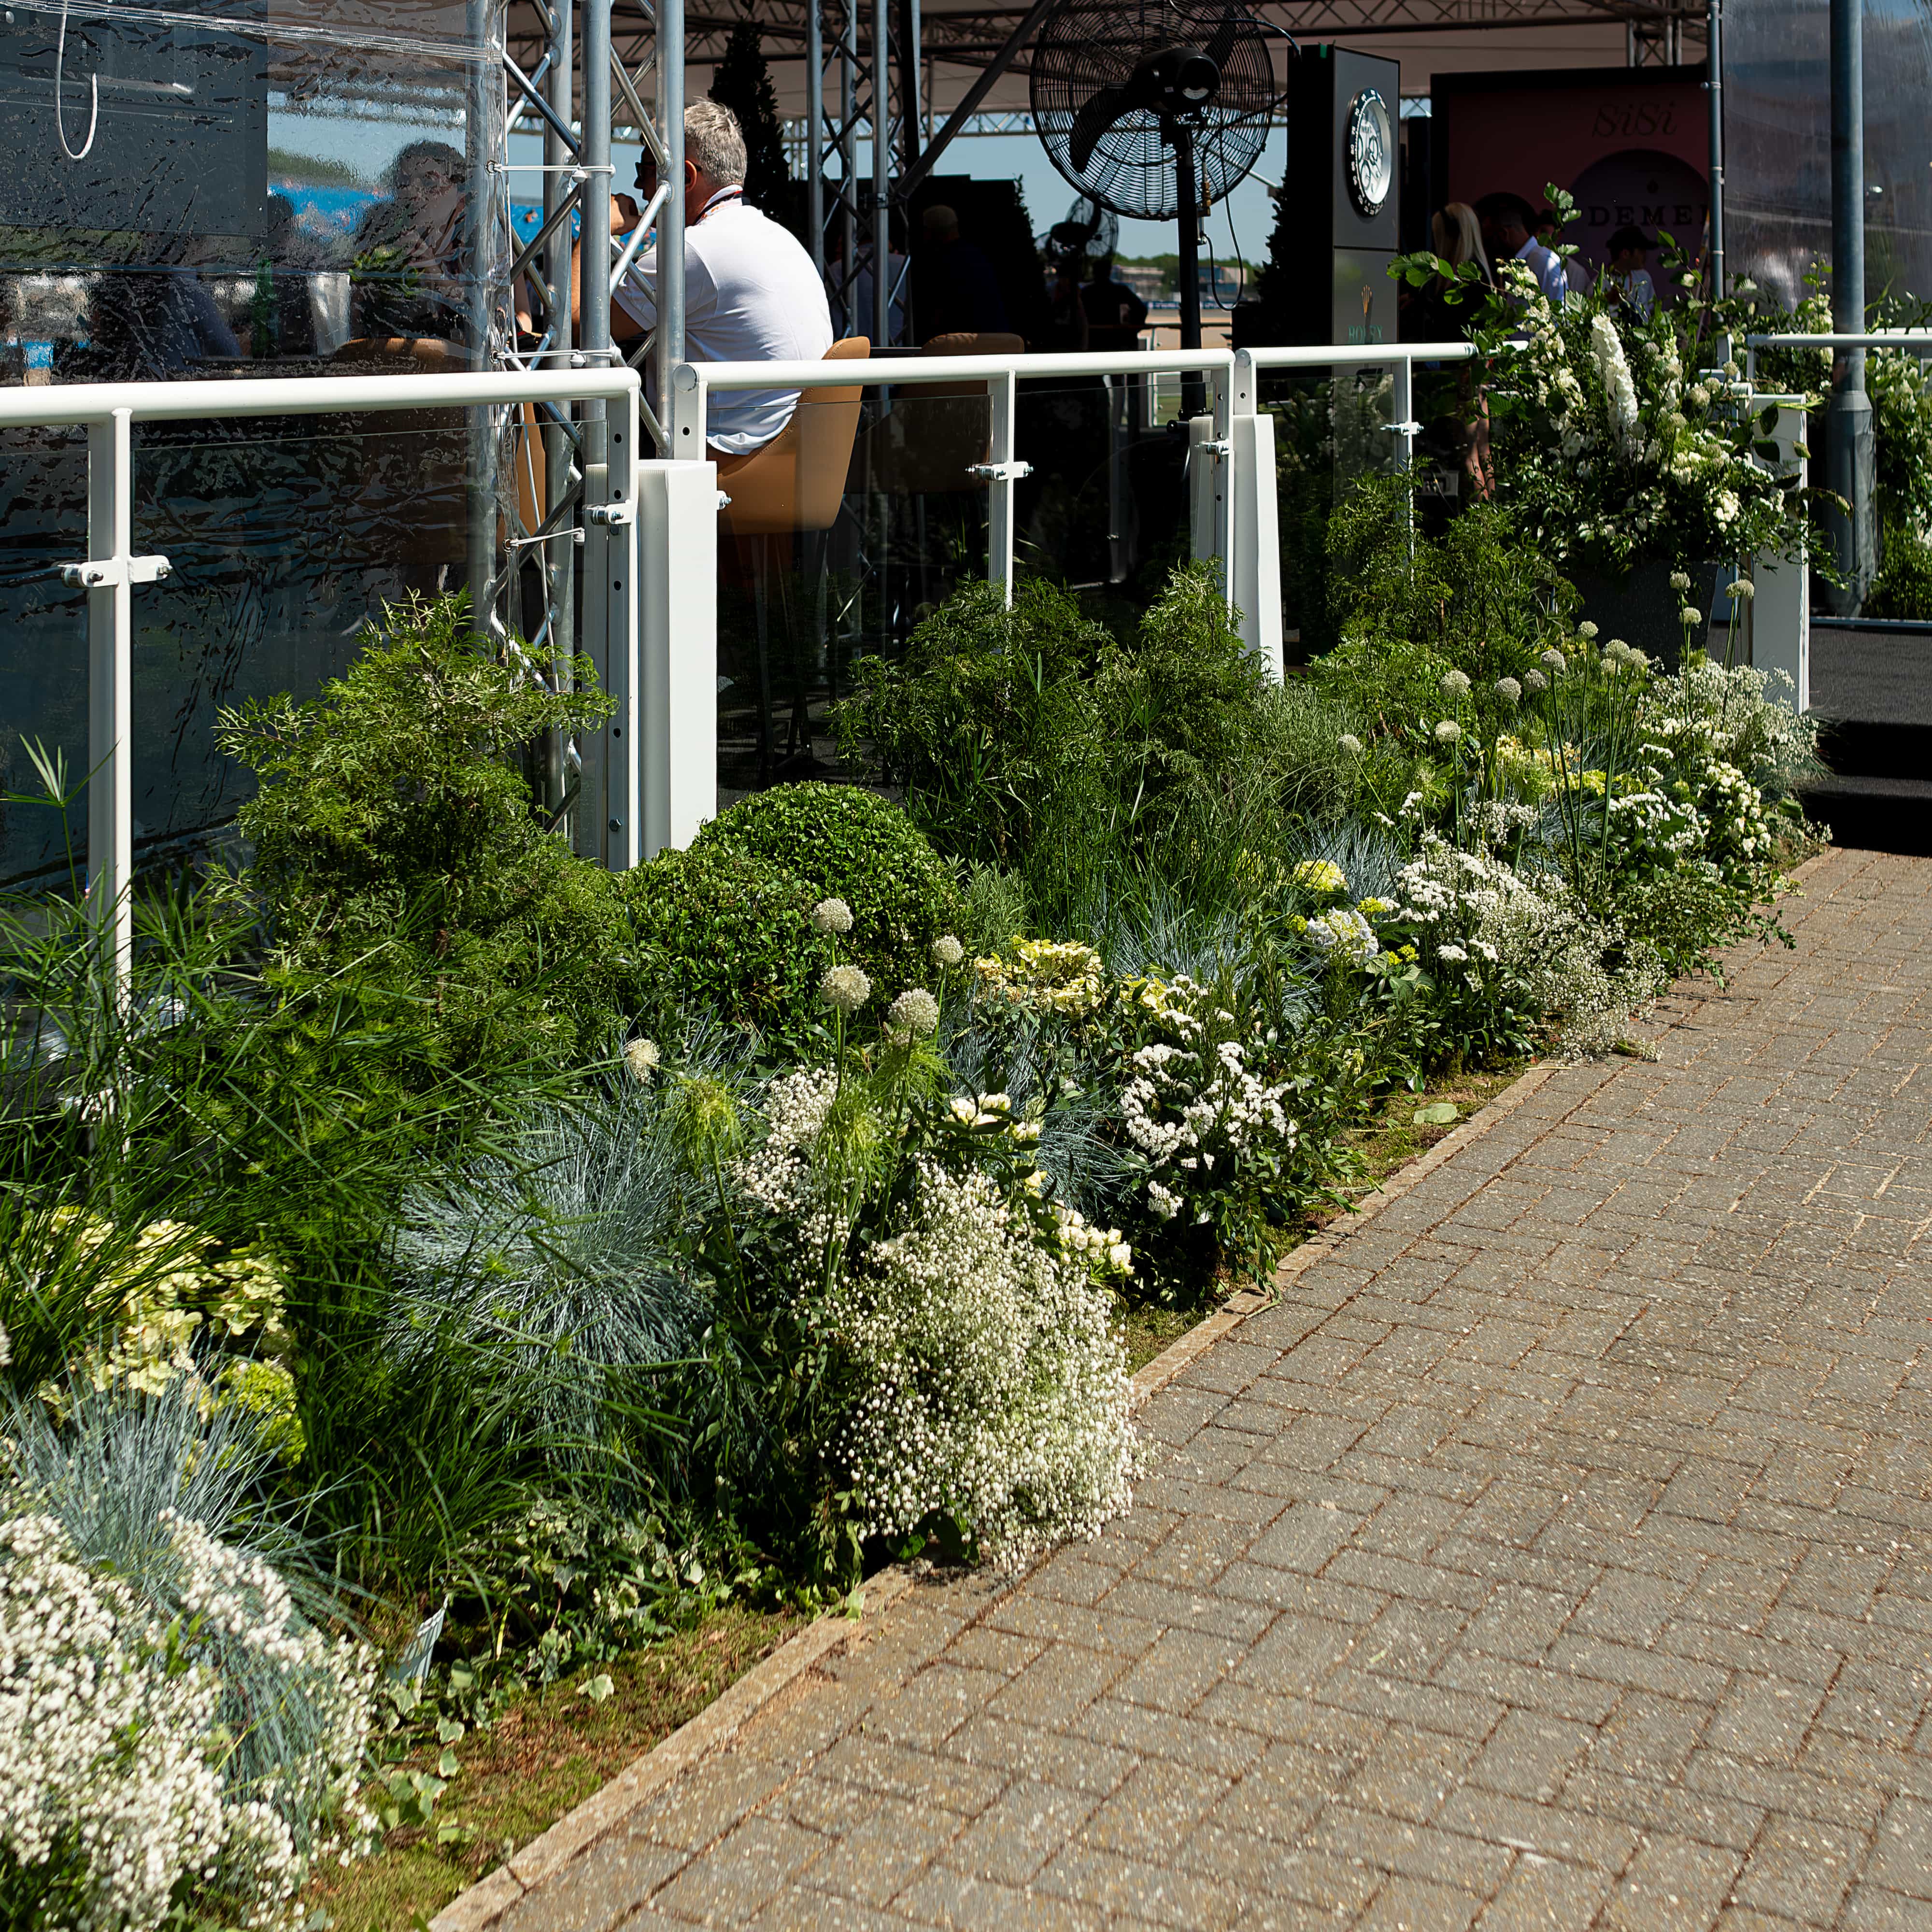 Exquisitely curated plant installations, meticulously arranged, elevating the ambiance at Formula 1's racing event held at Silverstone.